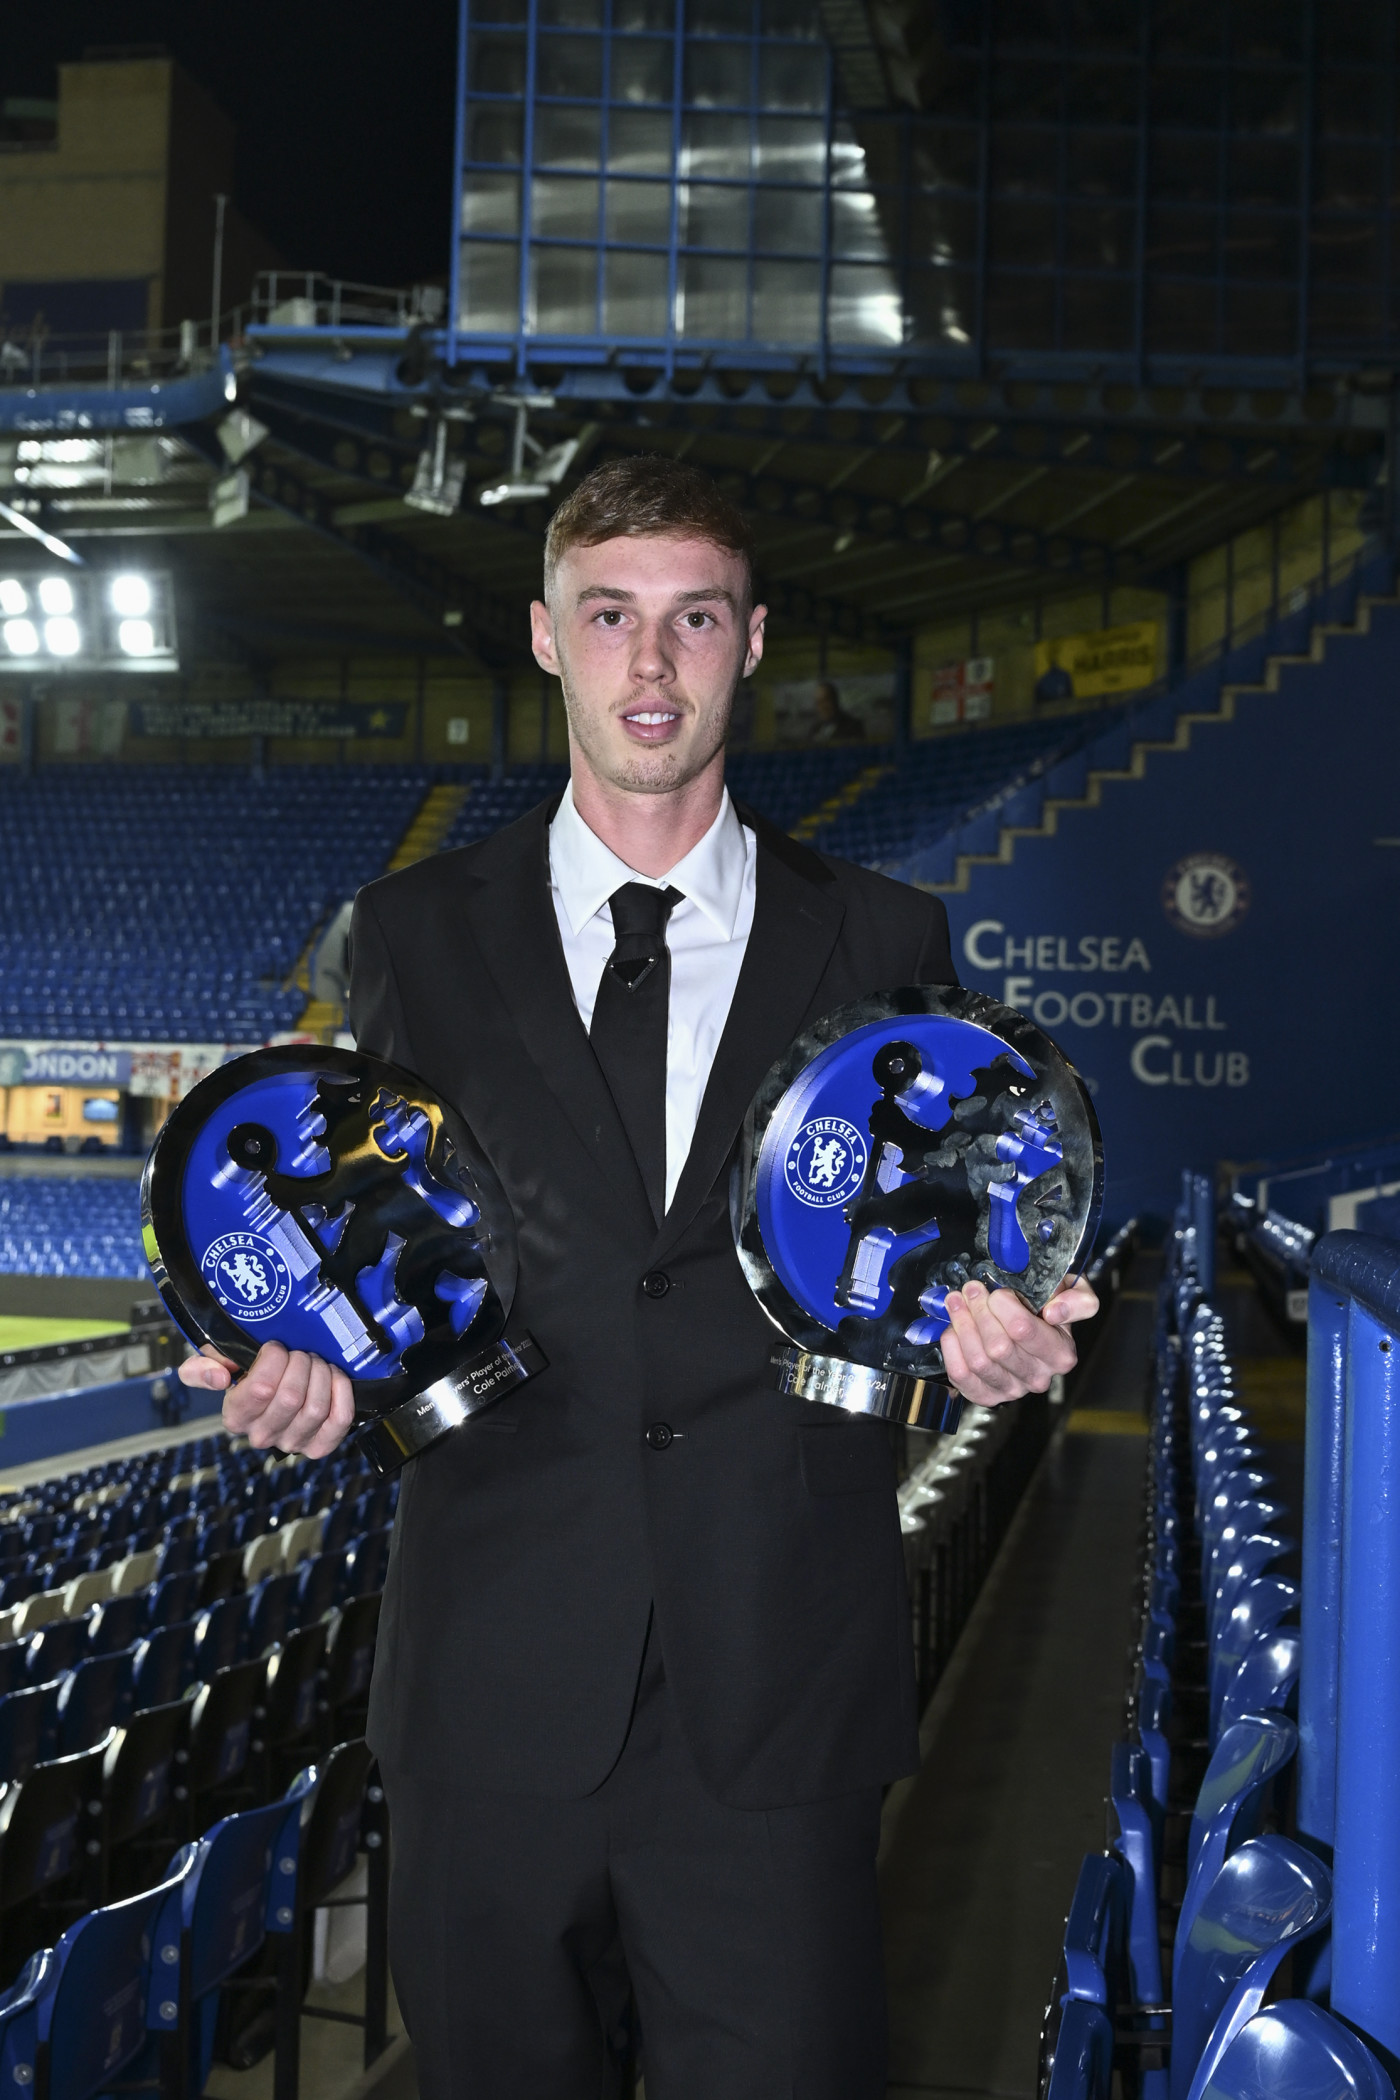 Cole with both his awards, the Men's Players' Player of the Season award and the Men's Player of the Season award